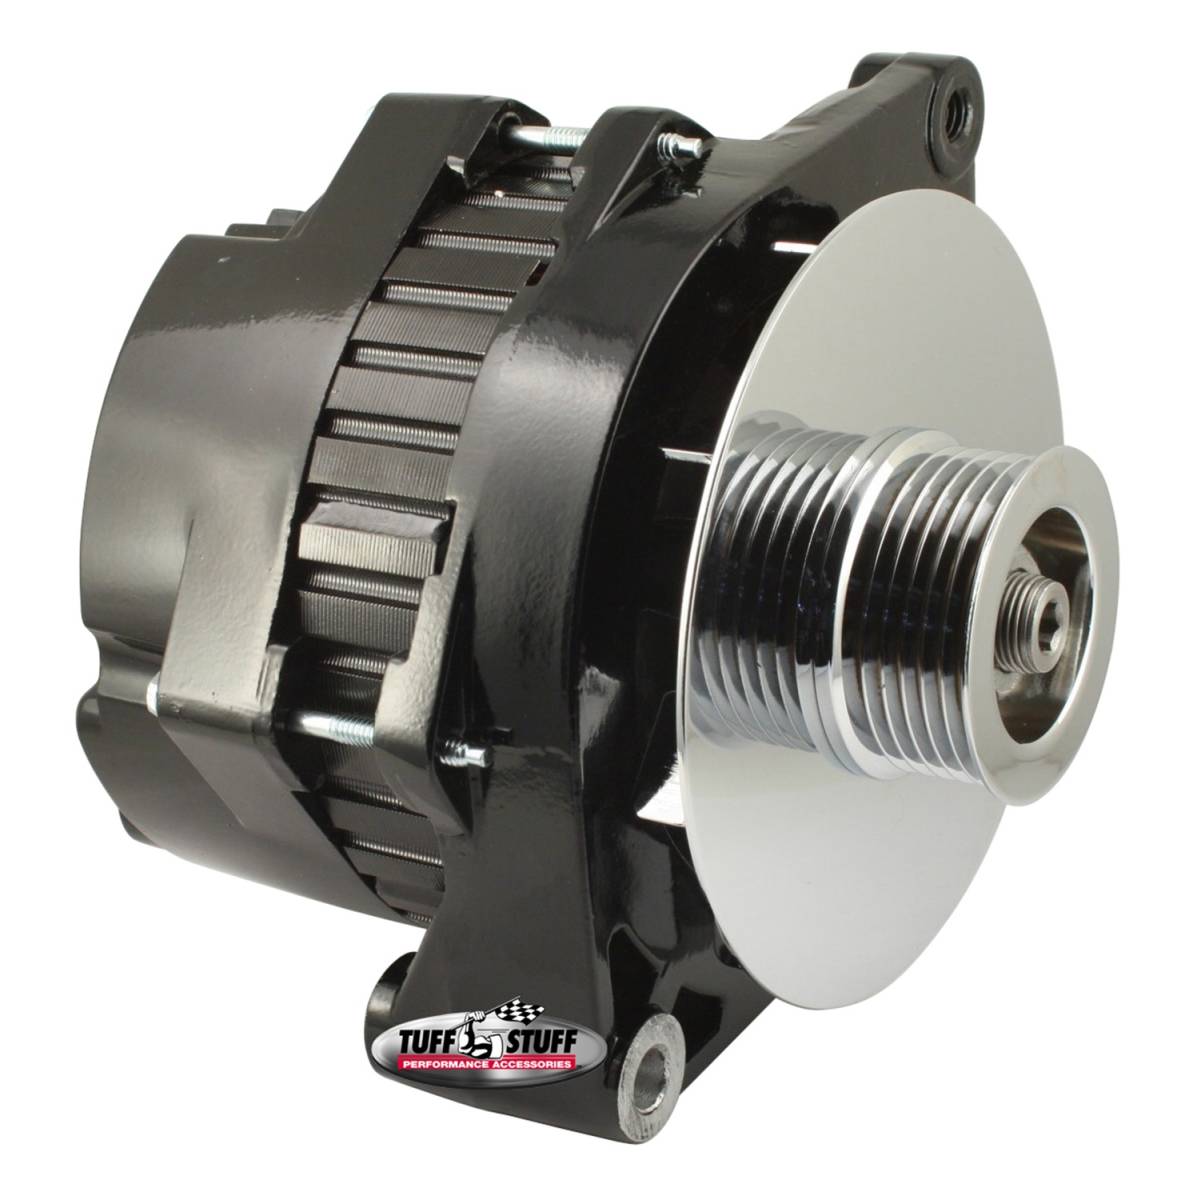 Tuff Stuff Performance - Alternator 250 High AMP Incl. Pigtail/OEM Wiring 6 Groove Pulley Black 7290NF6G